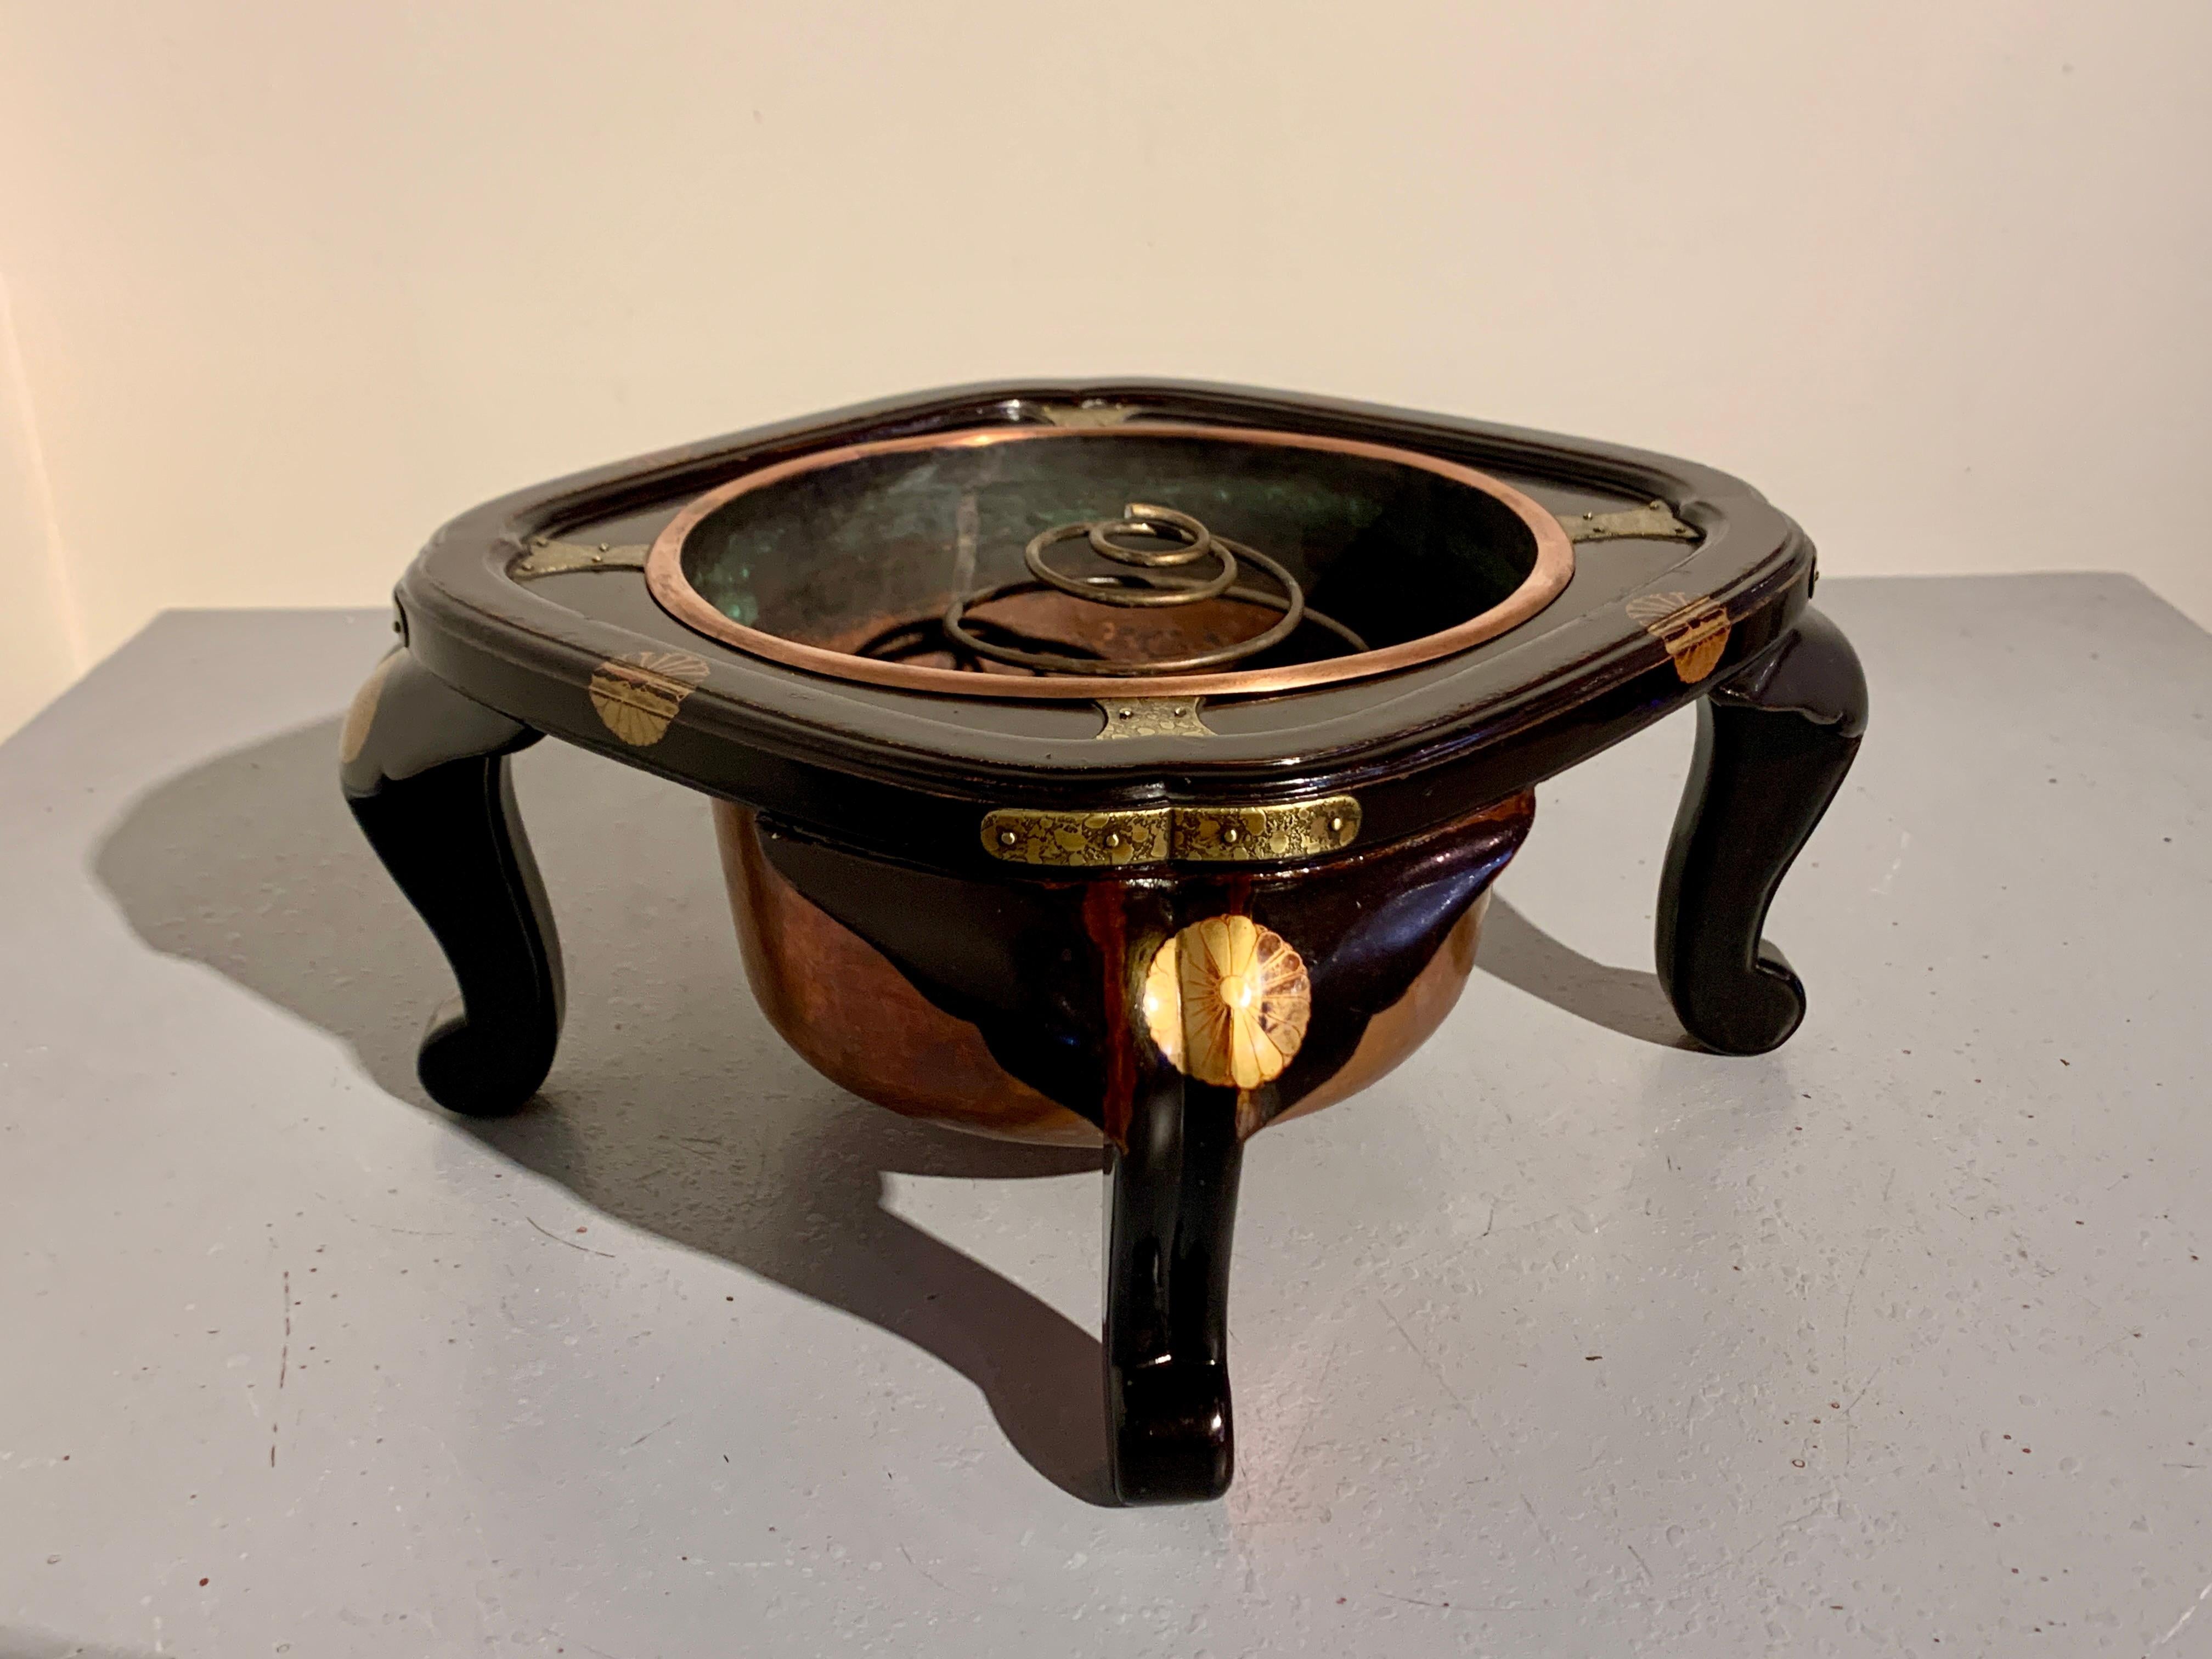 A simple and elegant Japanese lacquer hibachi stand with imperial chrysanthemum mon and copper liner, now modified as an usubata, late Meiji Period, circa 1900, Japan.

The refined black lacquer hibachi stand of low table or stand form, with